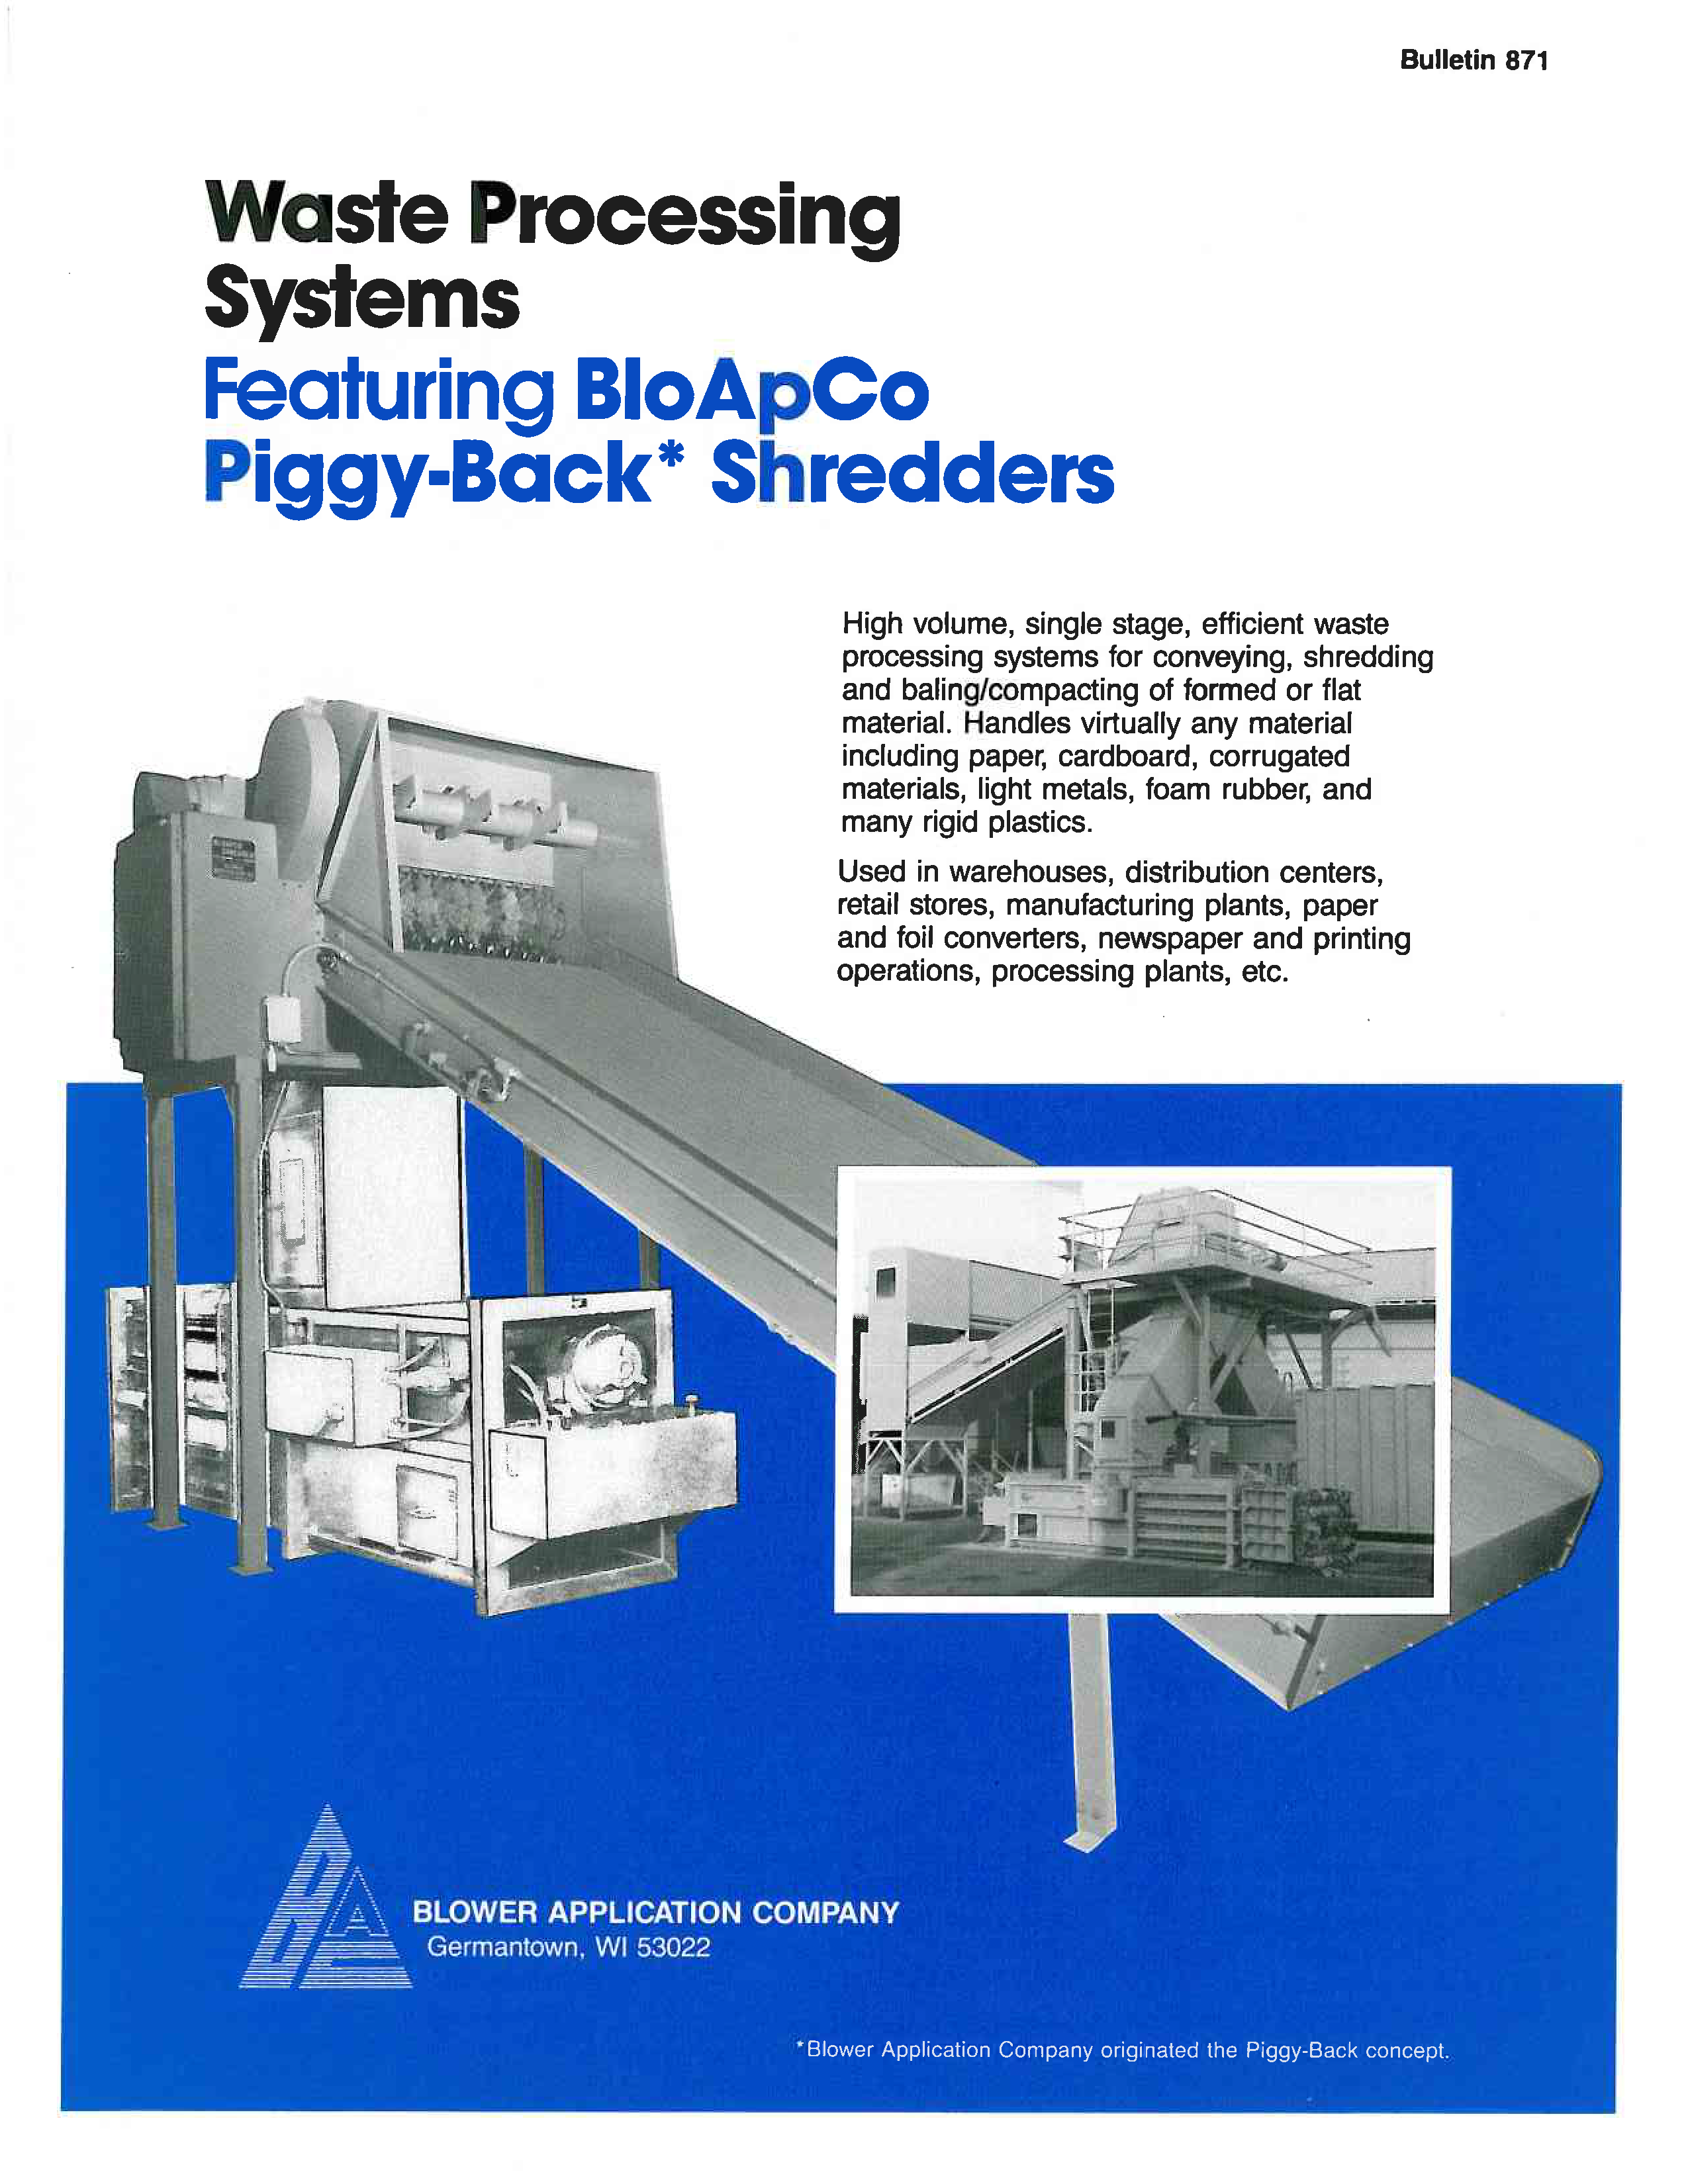 Learn more about the Piggyback Shredder in the BloApCo brochure. 